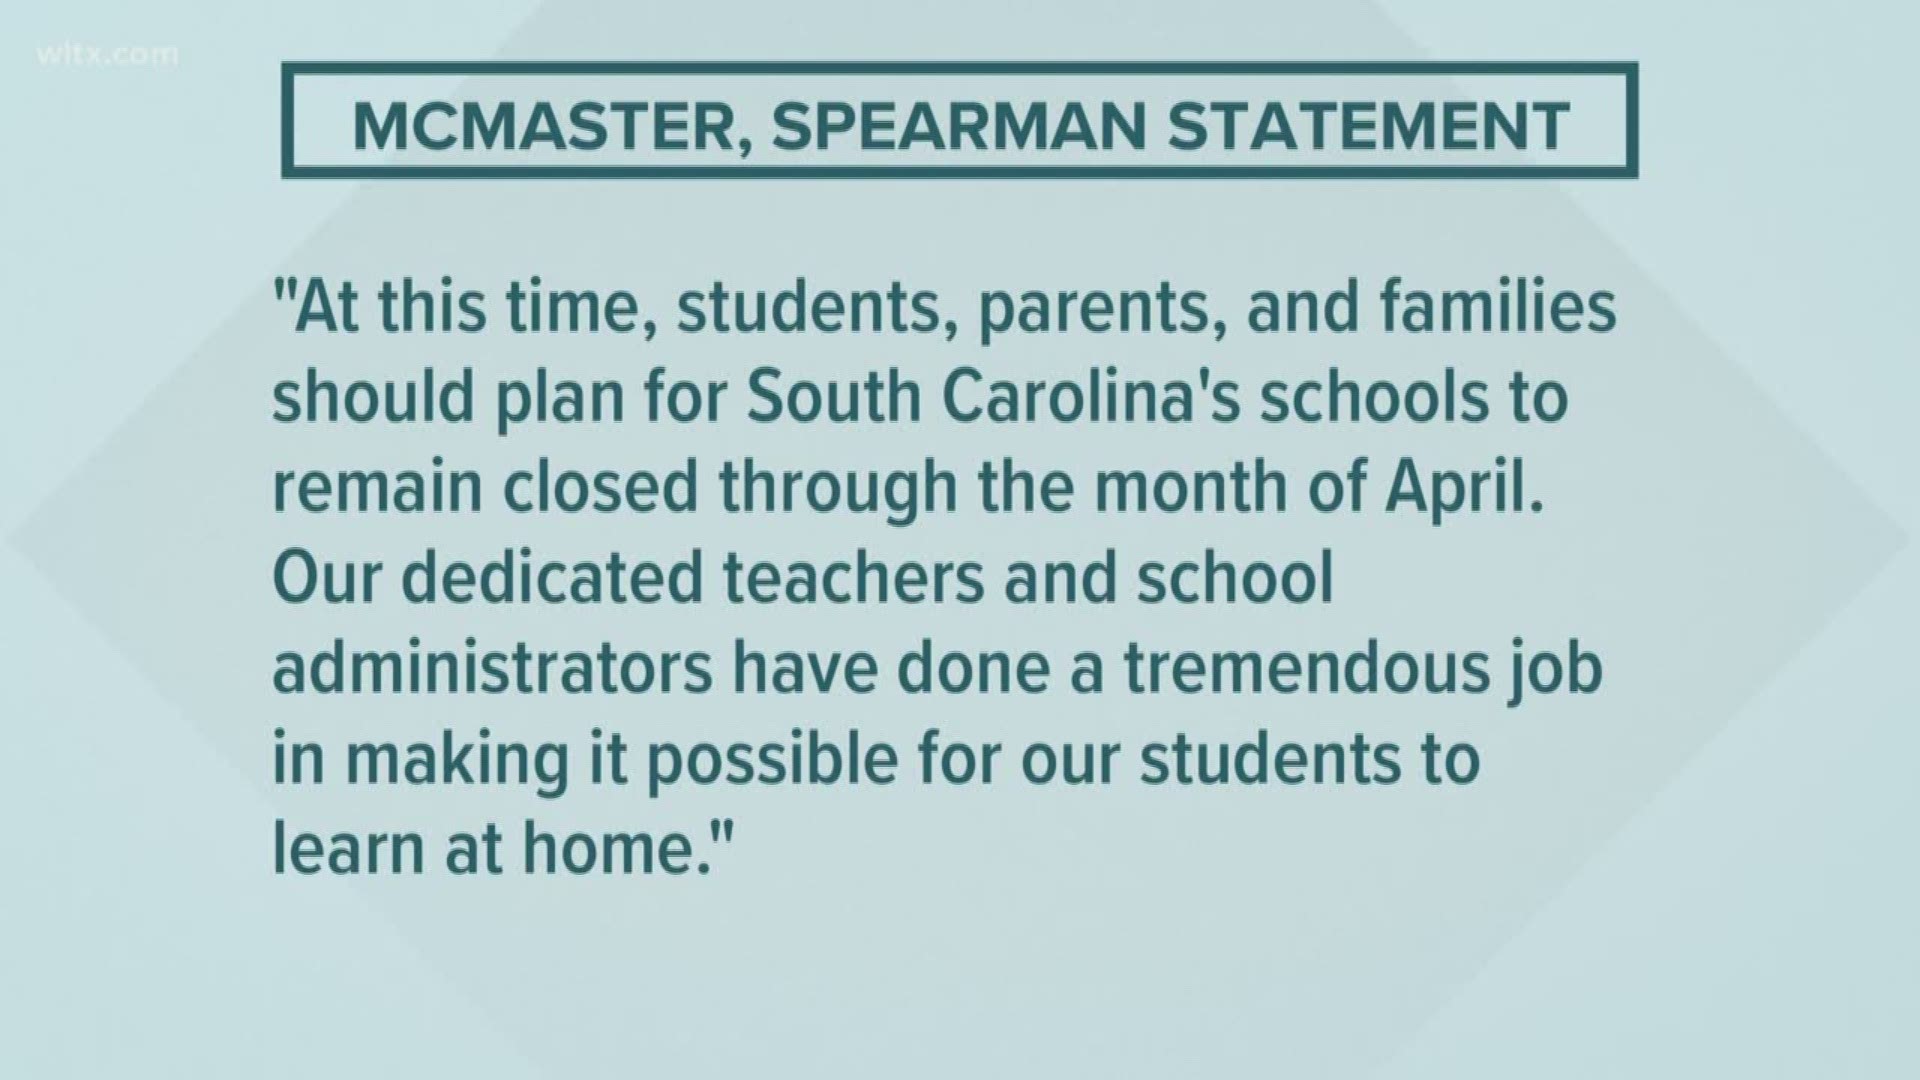 Gov McMaster and Eduation Superintendent Spearman announced the change today